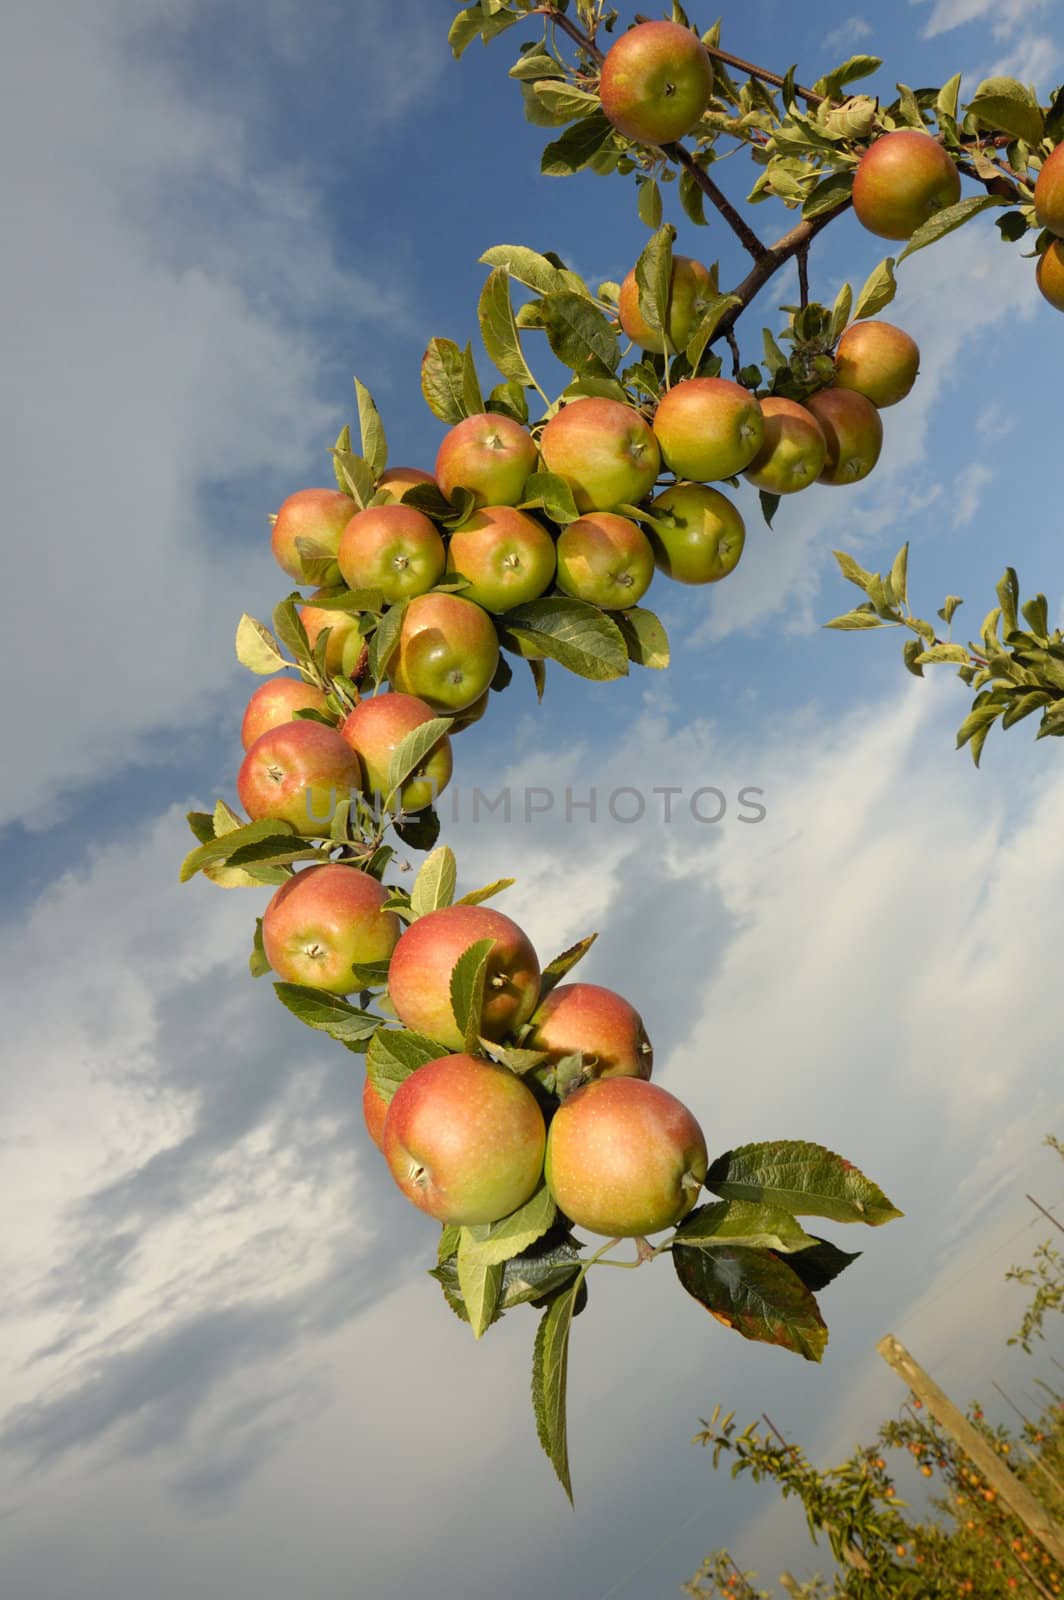 Apples on the bough by Bateleur